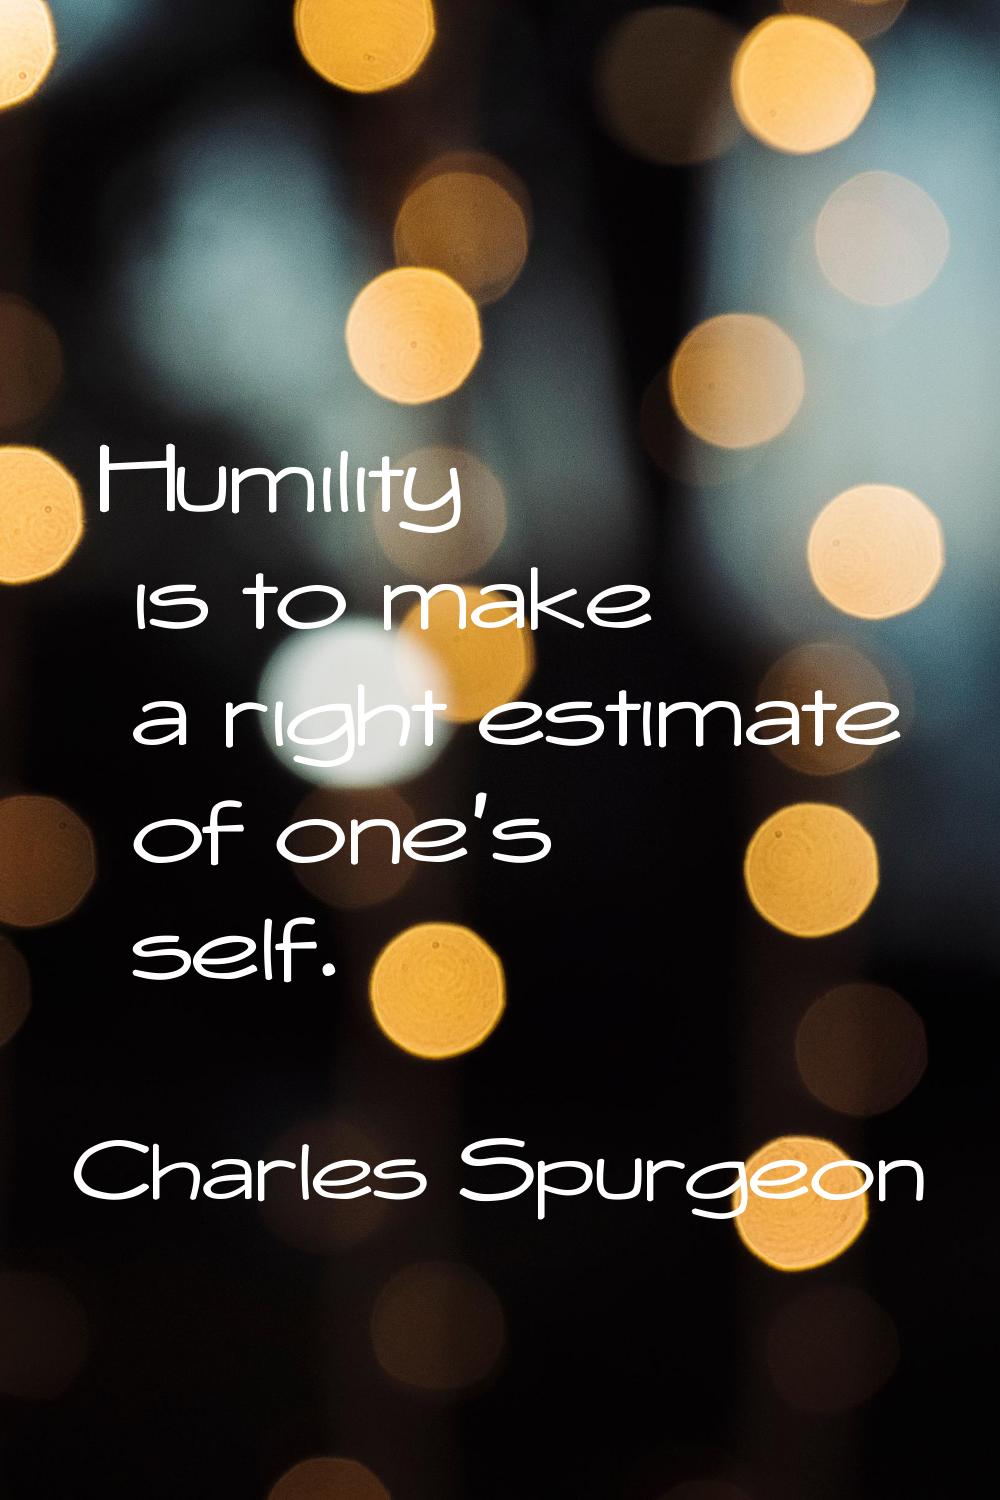 Humility is to make a right estimate of one's self.